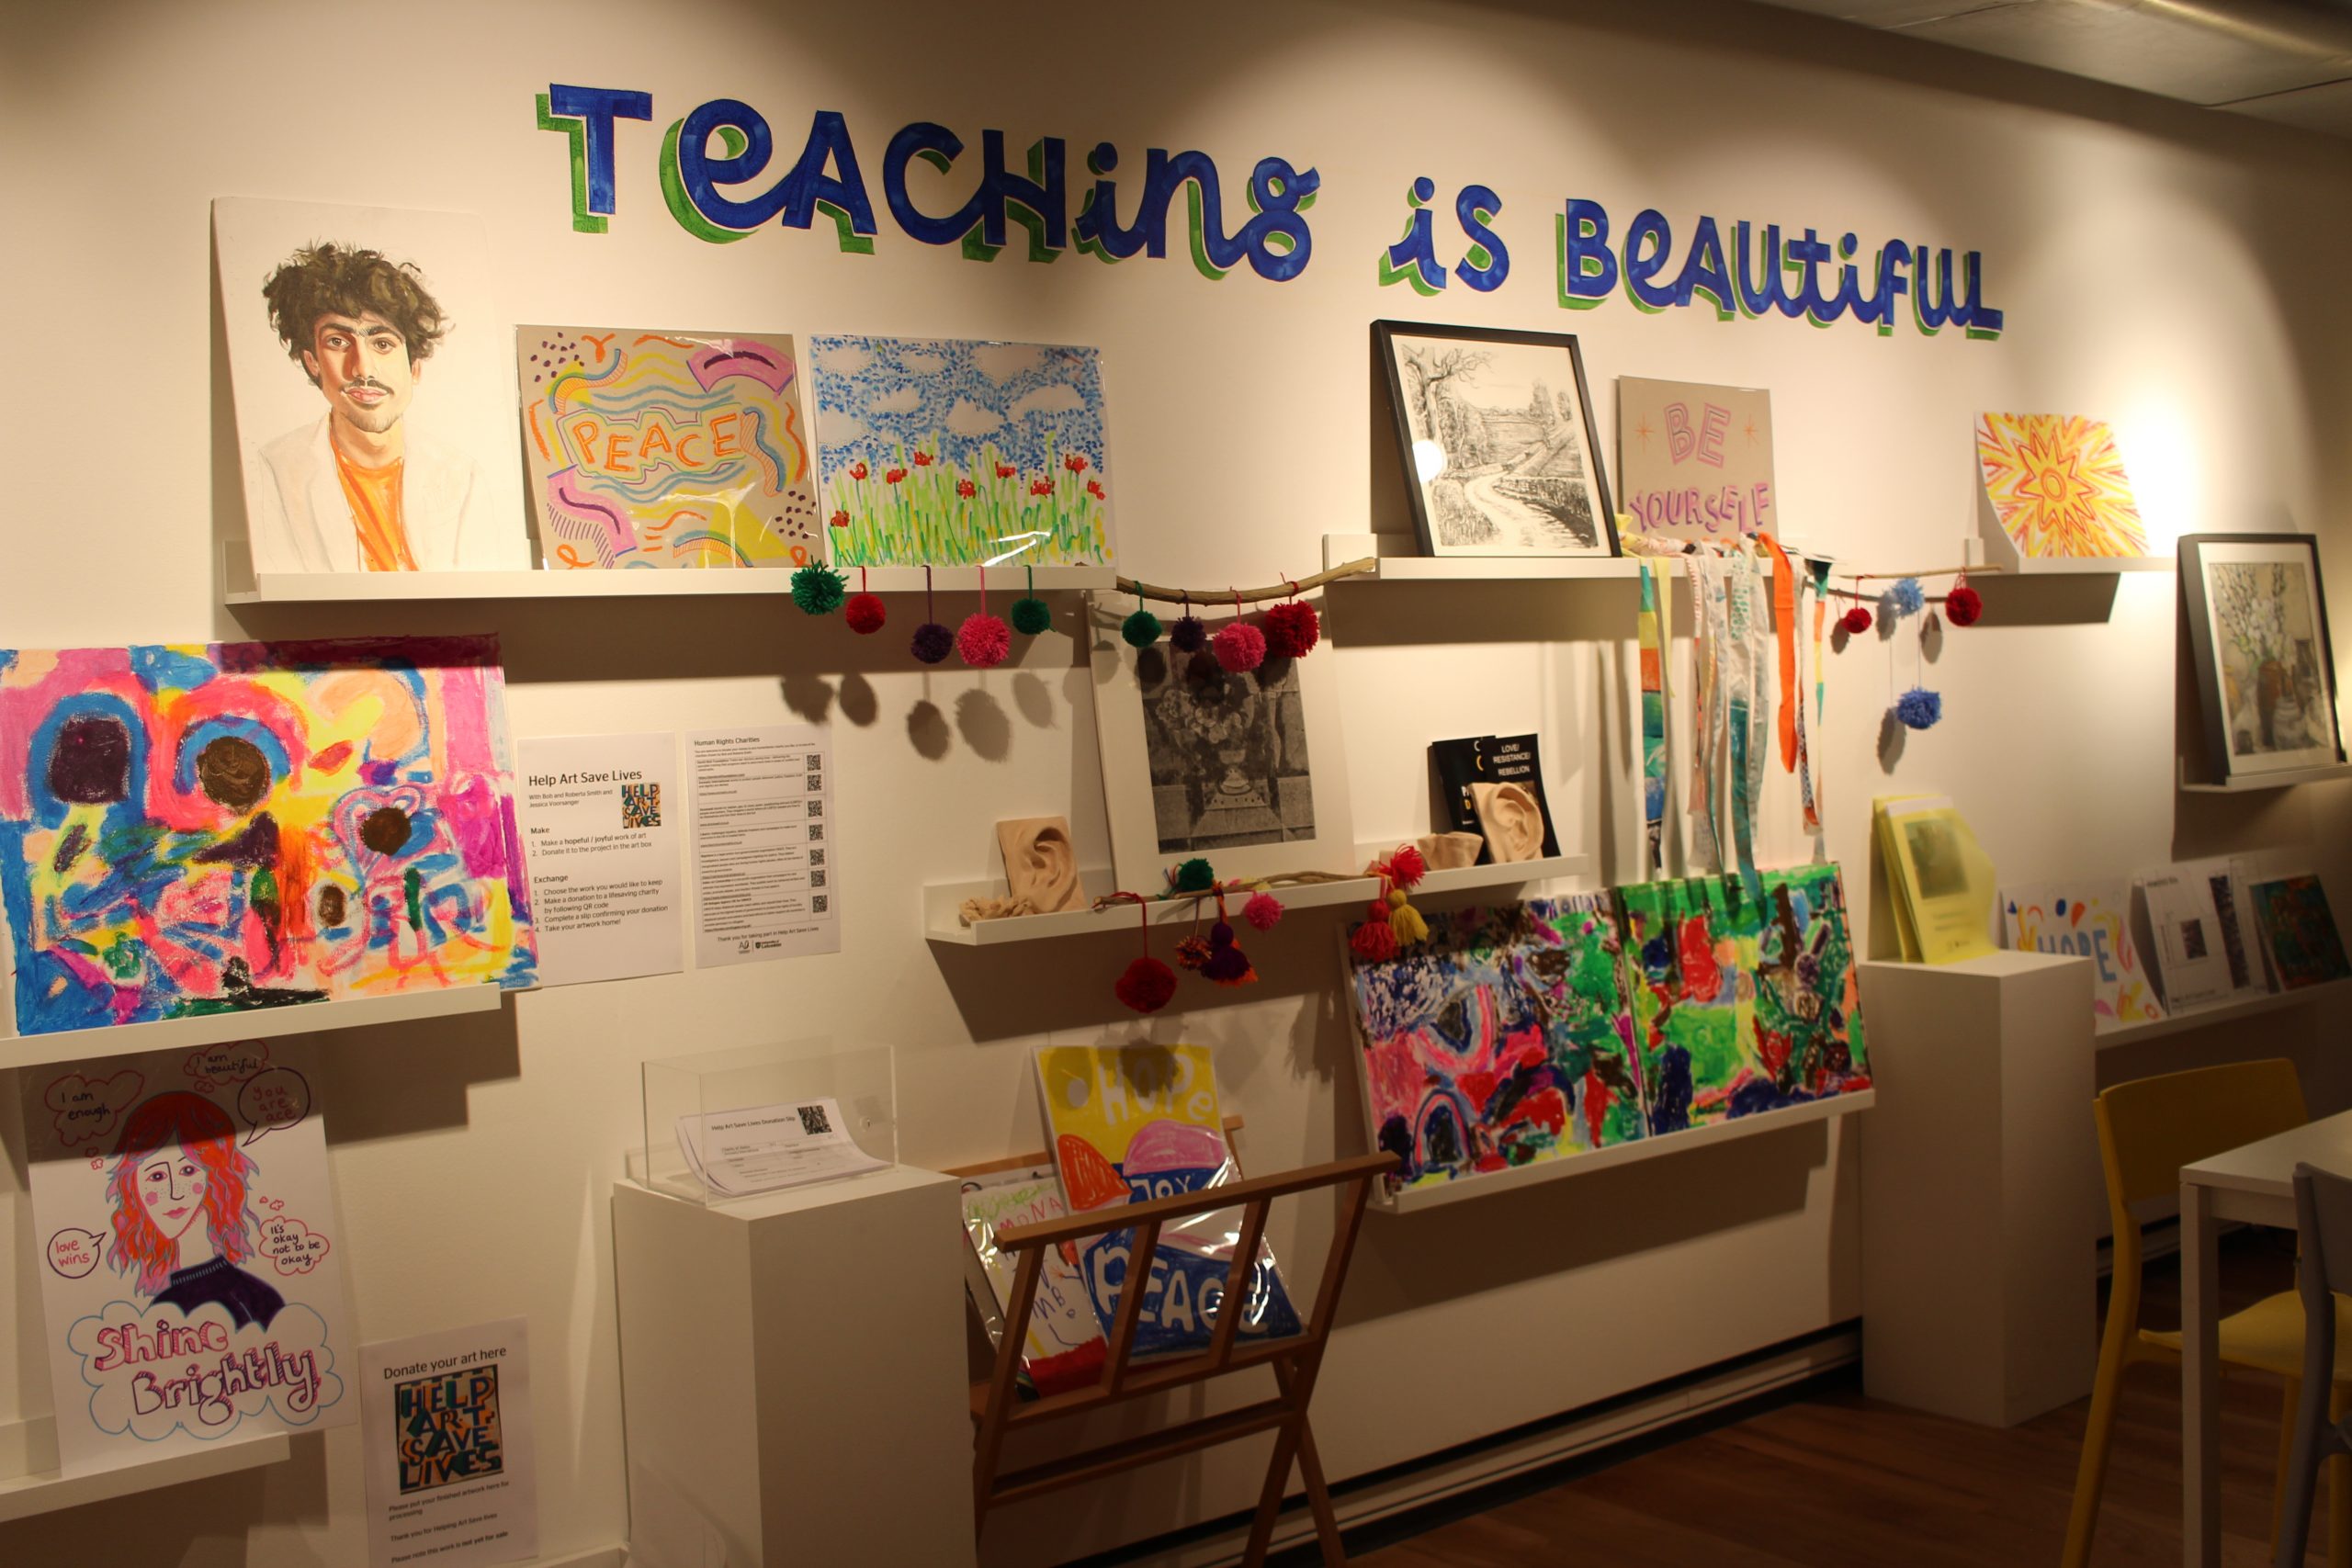 A wall full of art with teaching is beautiful painted on the wall